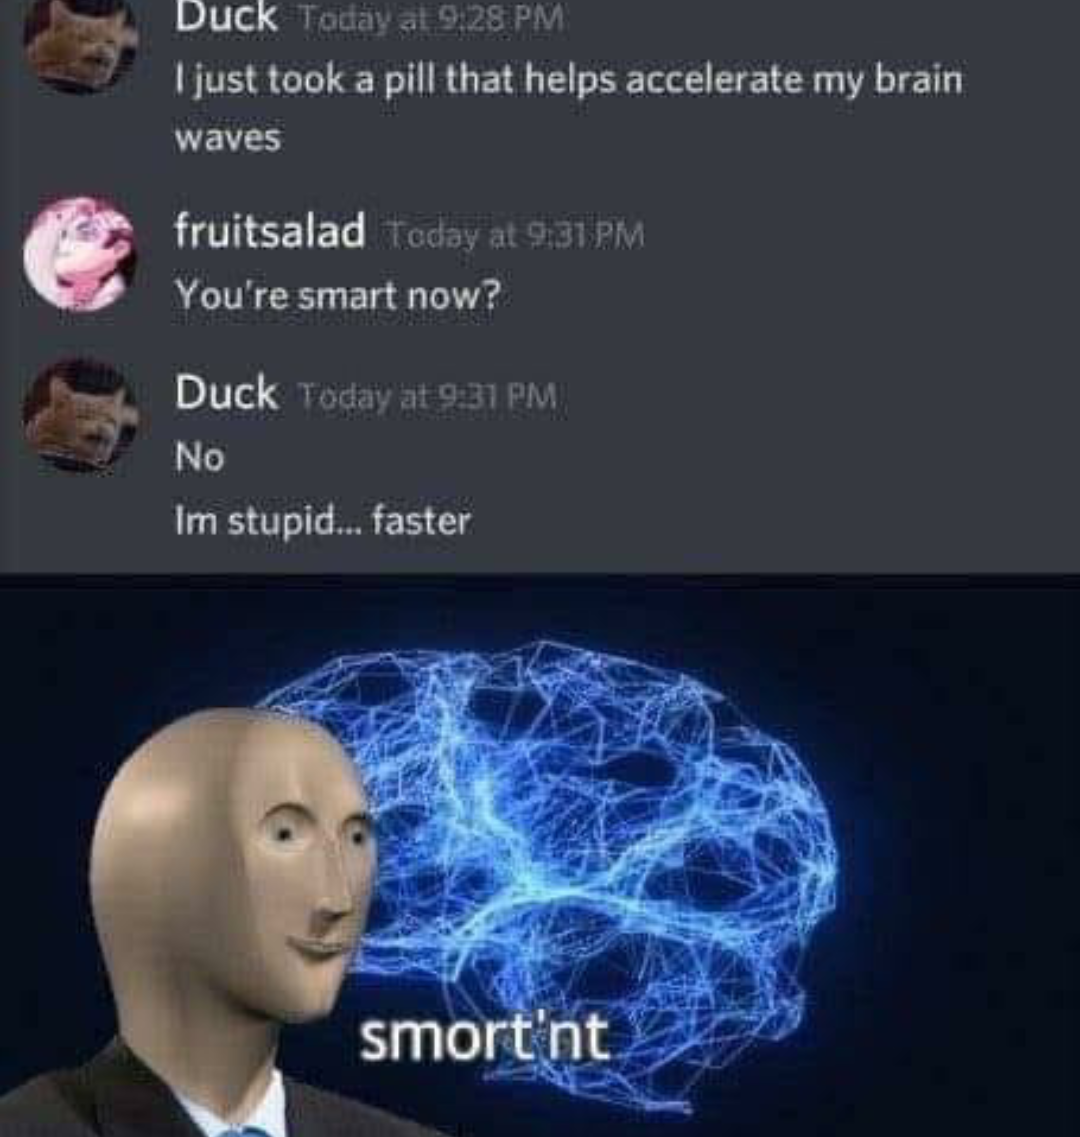 smort nt - Duck Today at I just took a pill that helps accelerate my brain waves fruitsalad Today at You're smart now? Duck Today at No Im stupid... faster smort'nt